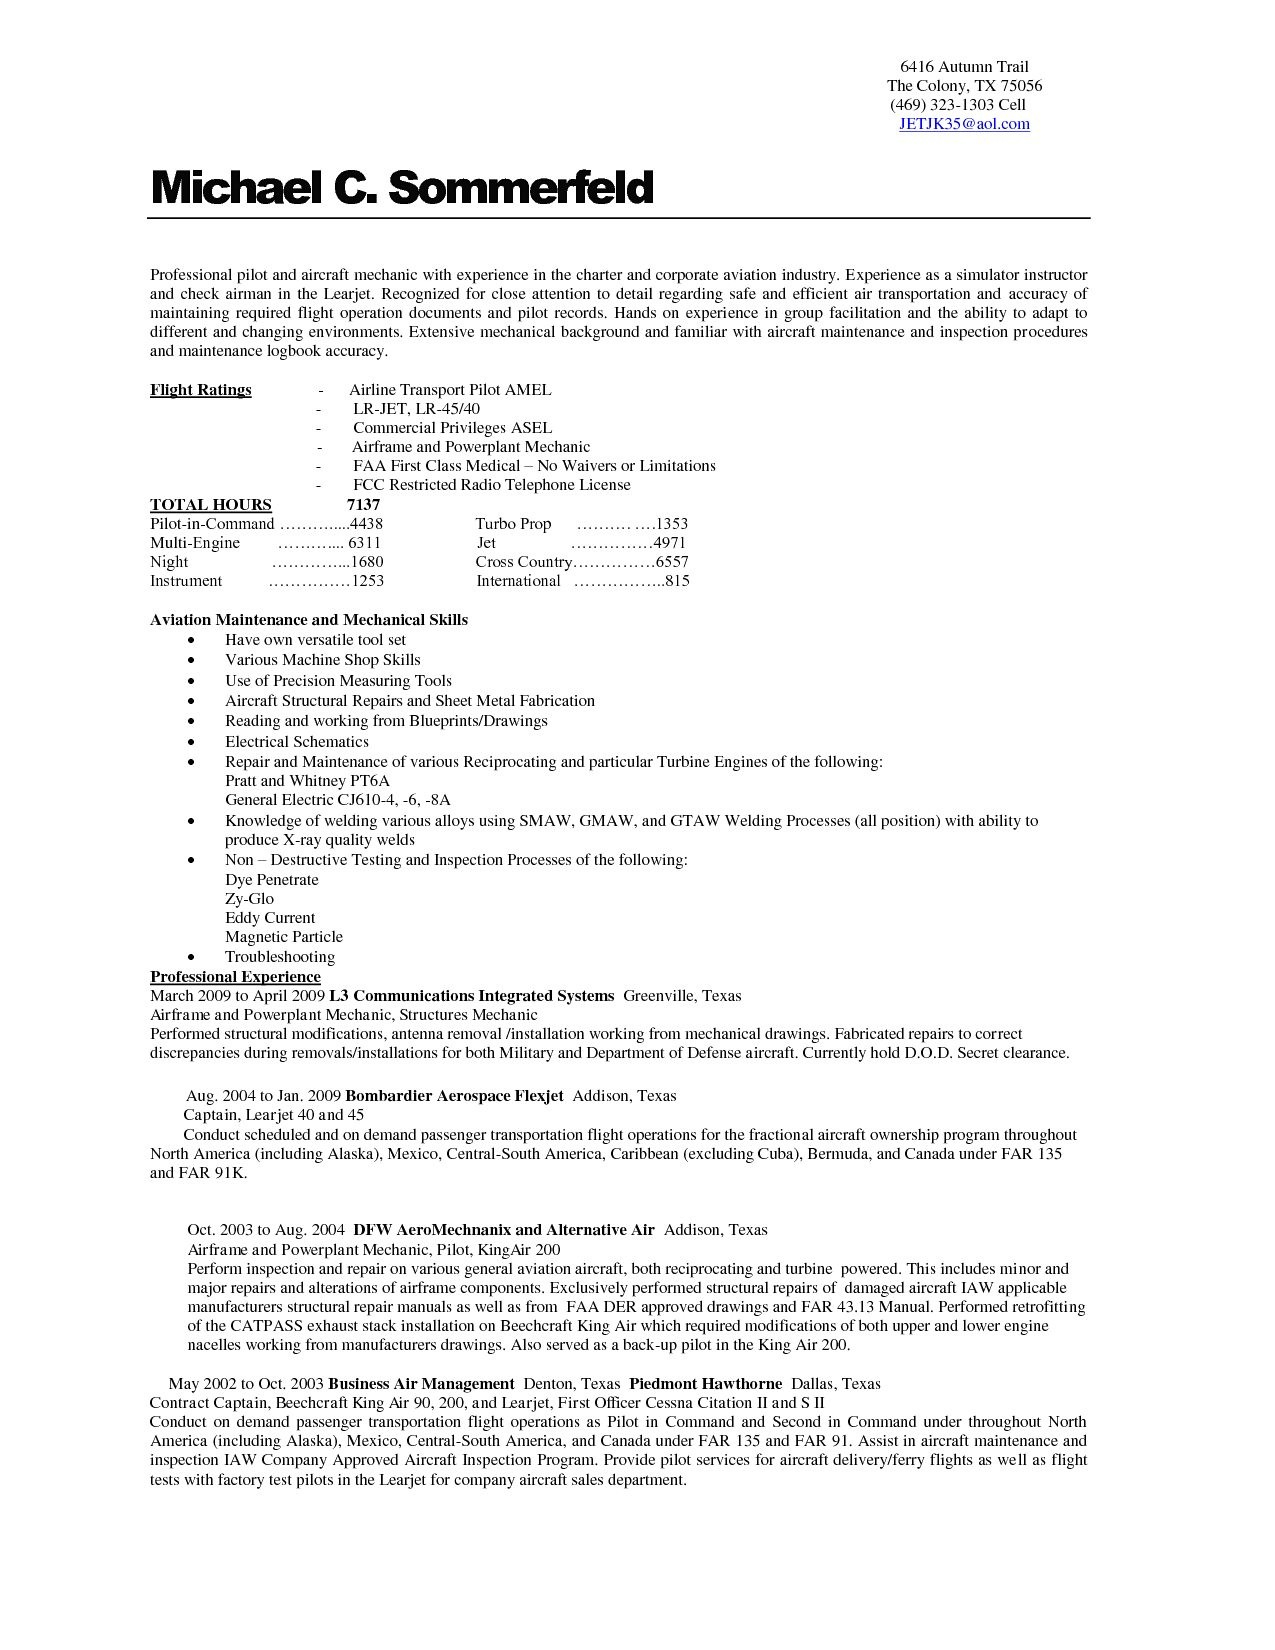 Aviation Cover Letter Template - Maintenance Technician Resume Template Awesome Cover Letter